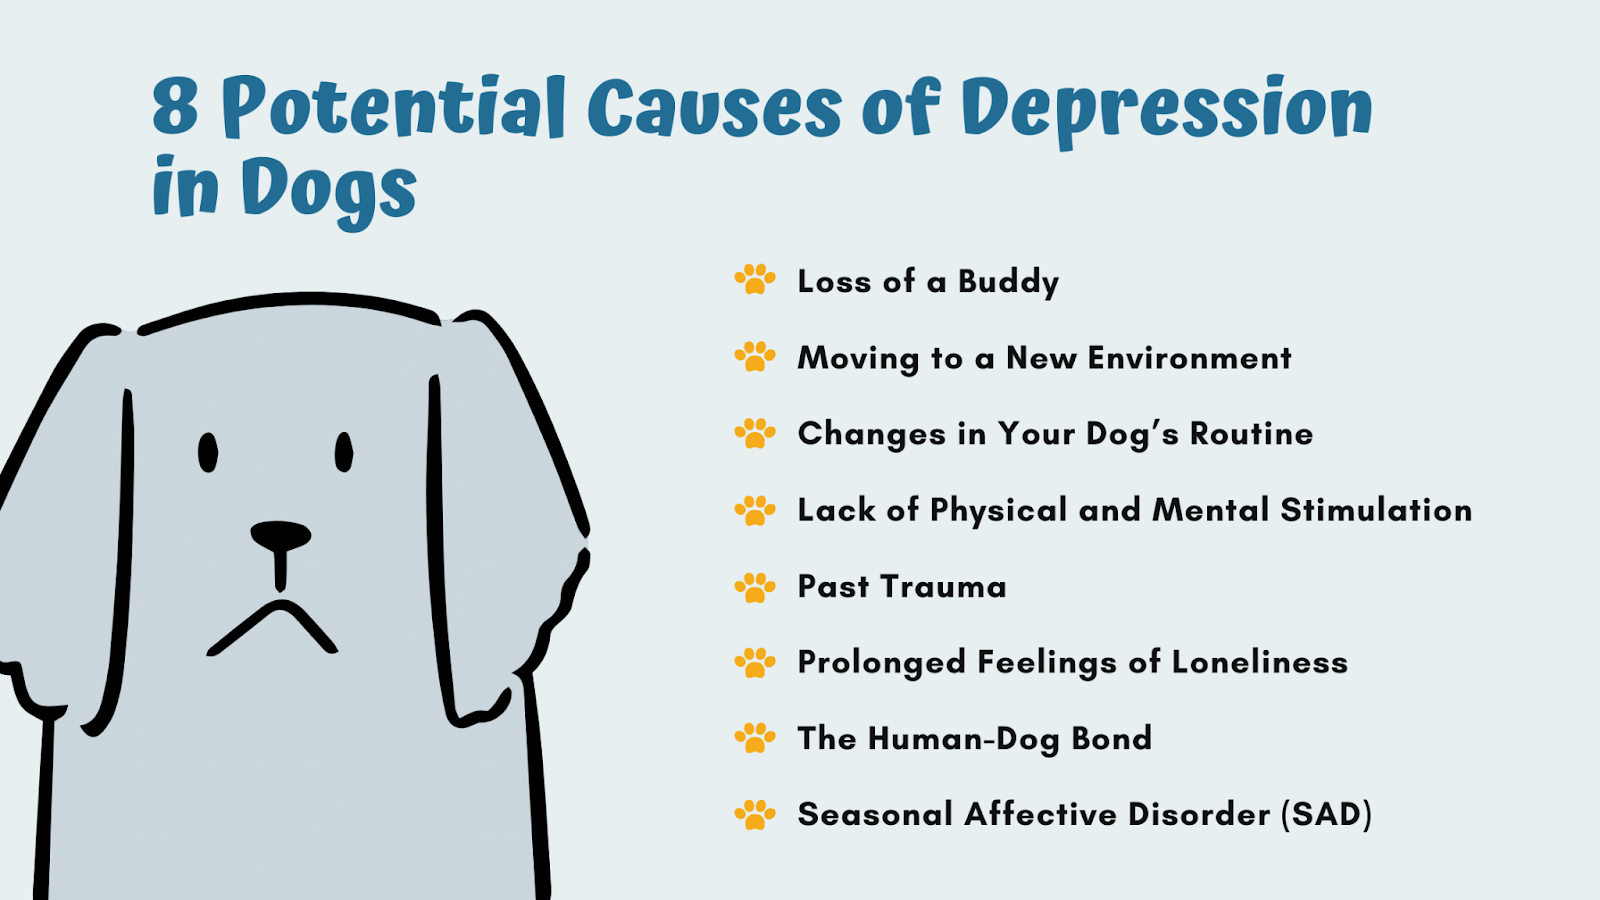 Causes of depression in dogs